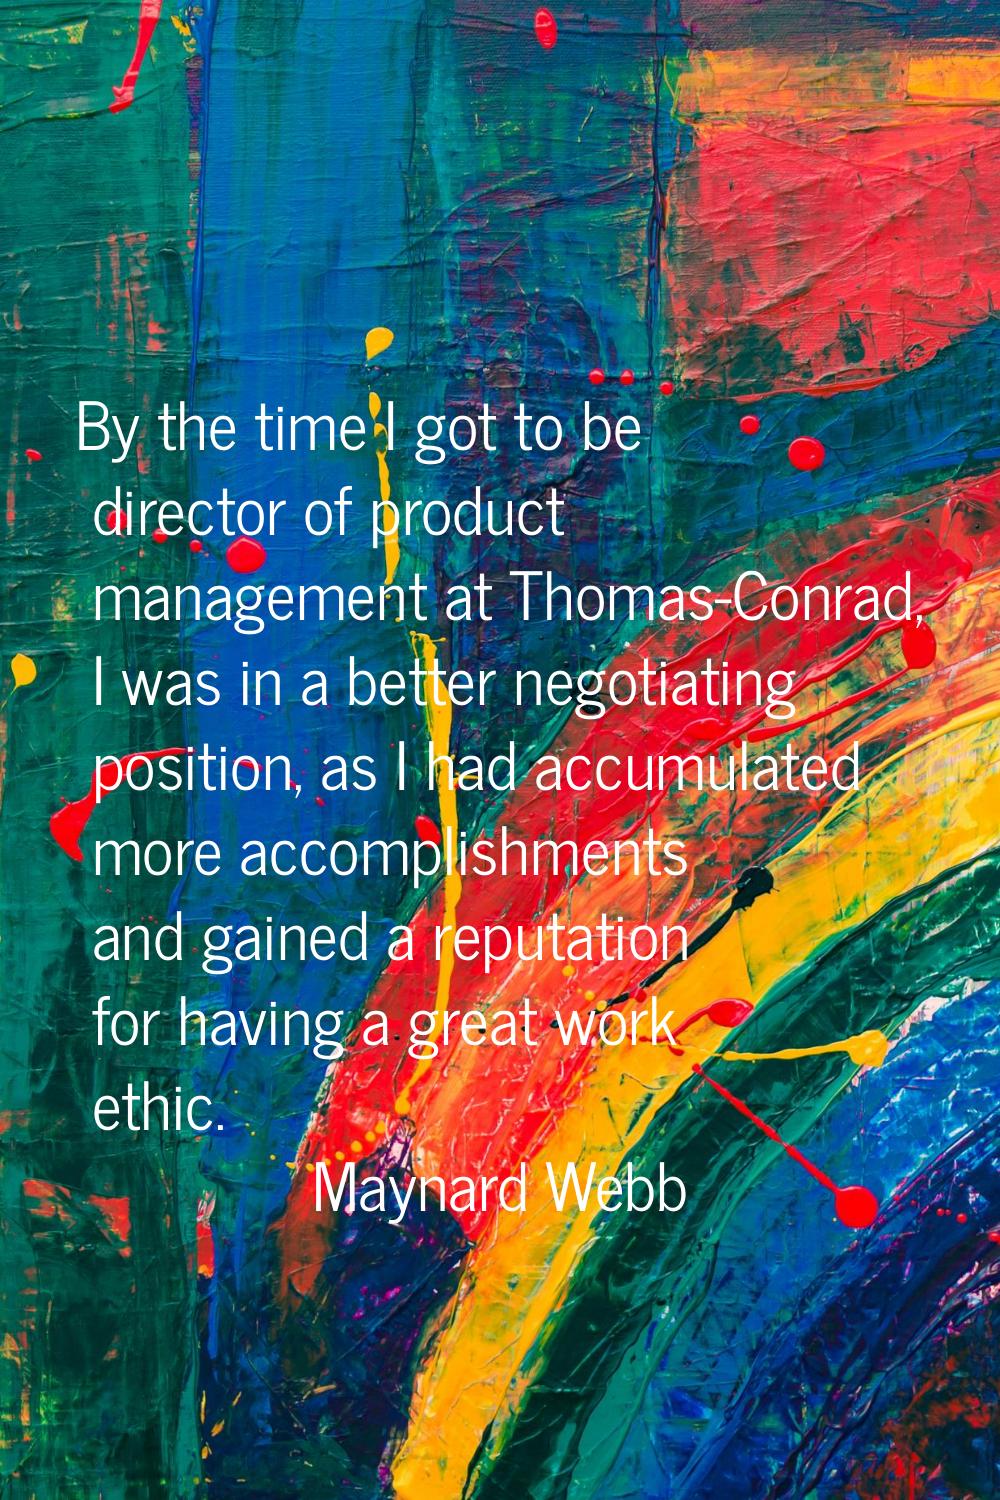 By the time I got to be director of product management at Thomas-Conrad, I was in a better negotiat